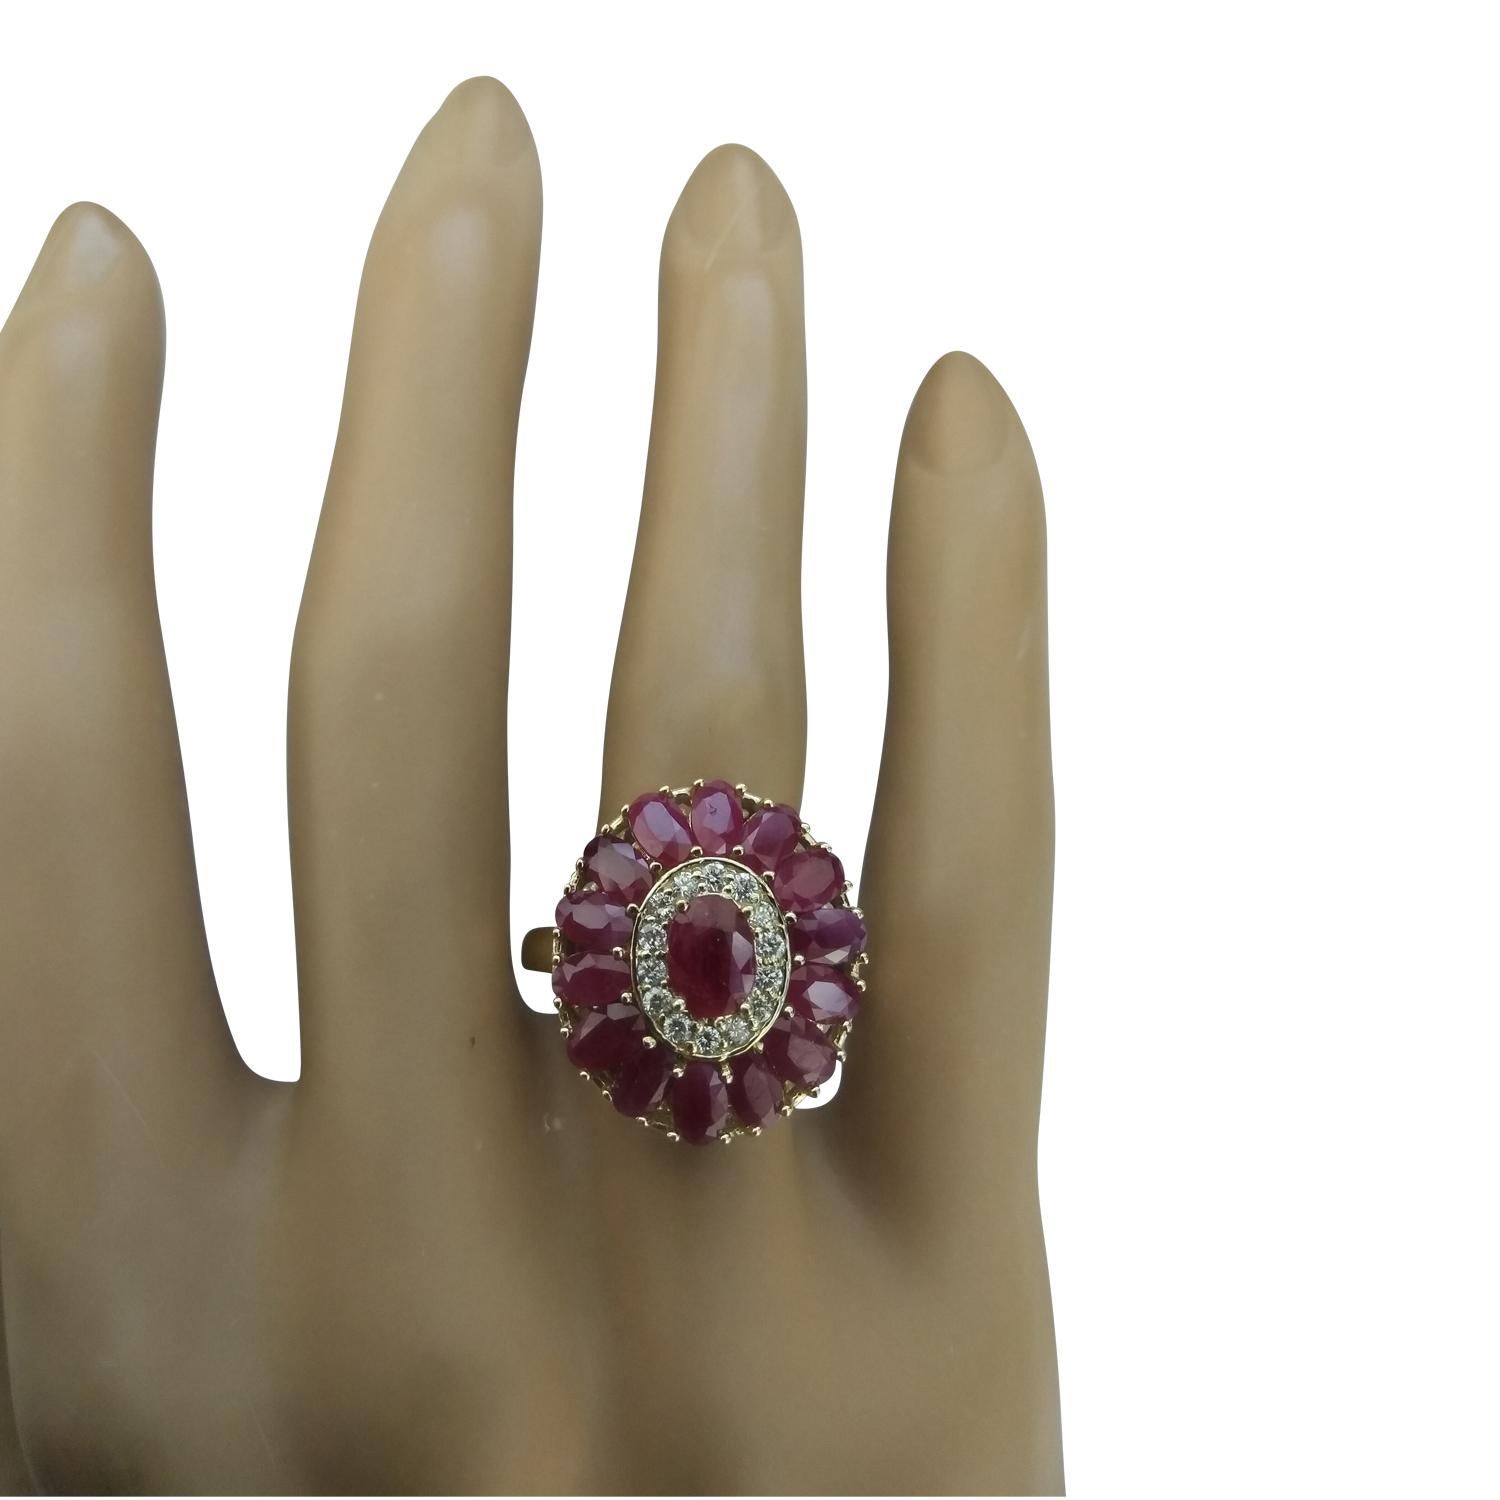 4.40 Carat Natural Ruby 14 Karat Solid Yellow Gold Diamond Ring
Stamped: 14K
Total Ring Weight: 6.3 Grams 
Ruby Weight 4.05 Carat (1- 6.00x4.00mm, 14 - 3.00x5.00mm) 
Diamond Weight: 0.35 carat (F-G Color, VS2-SI1 Clarity )
Face Measures: 20.30x17.80